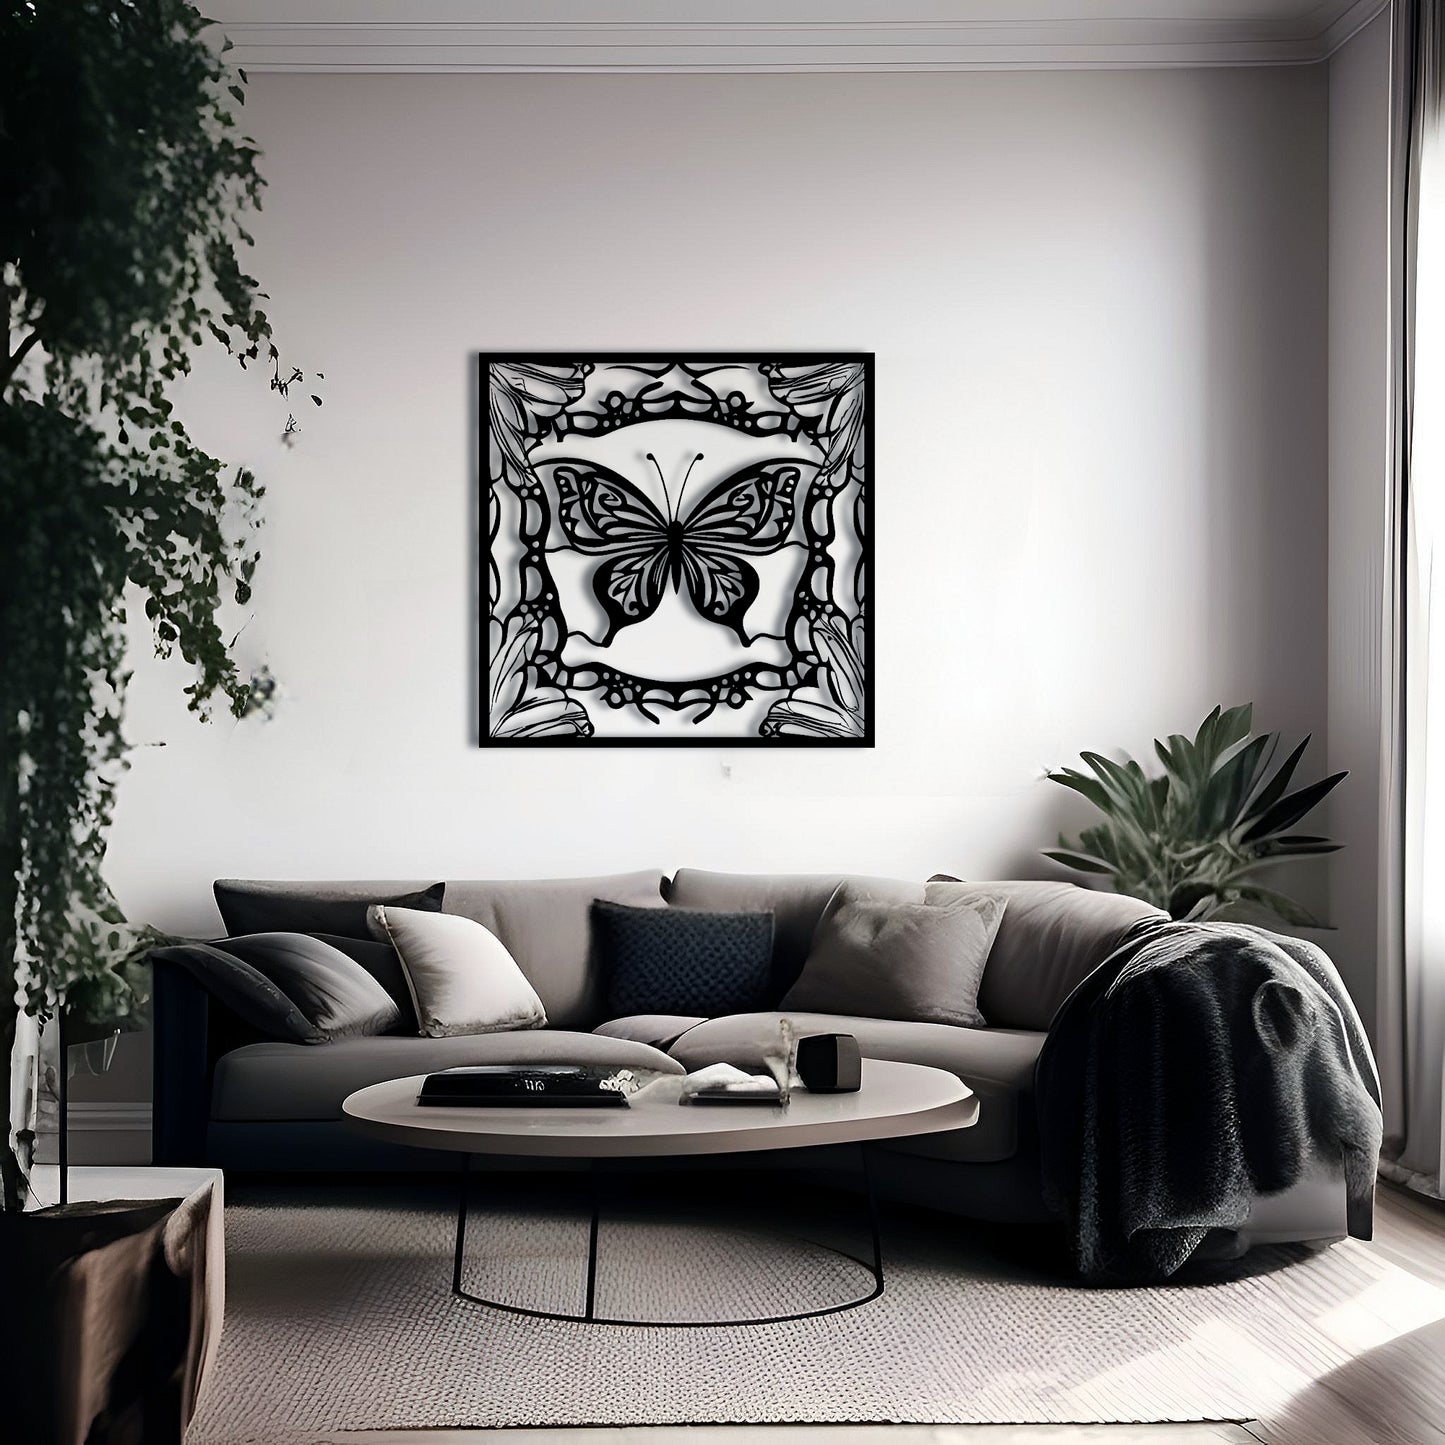 Winged Wonders Butterfly Metal Wall Art for Living Room